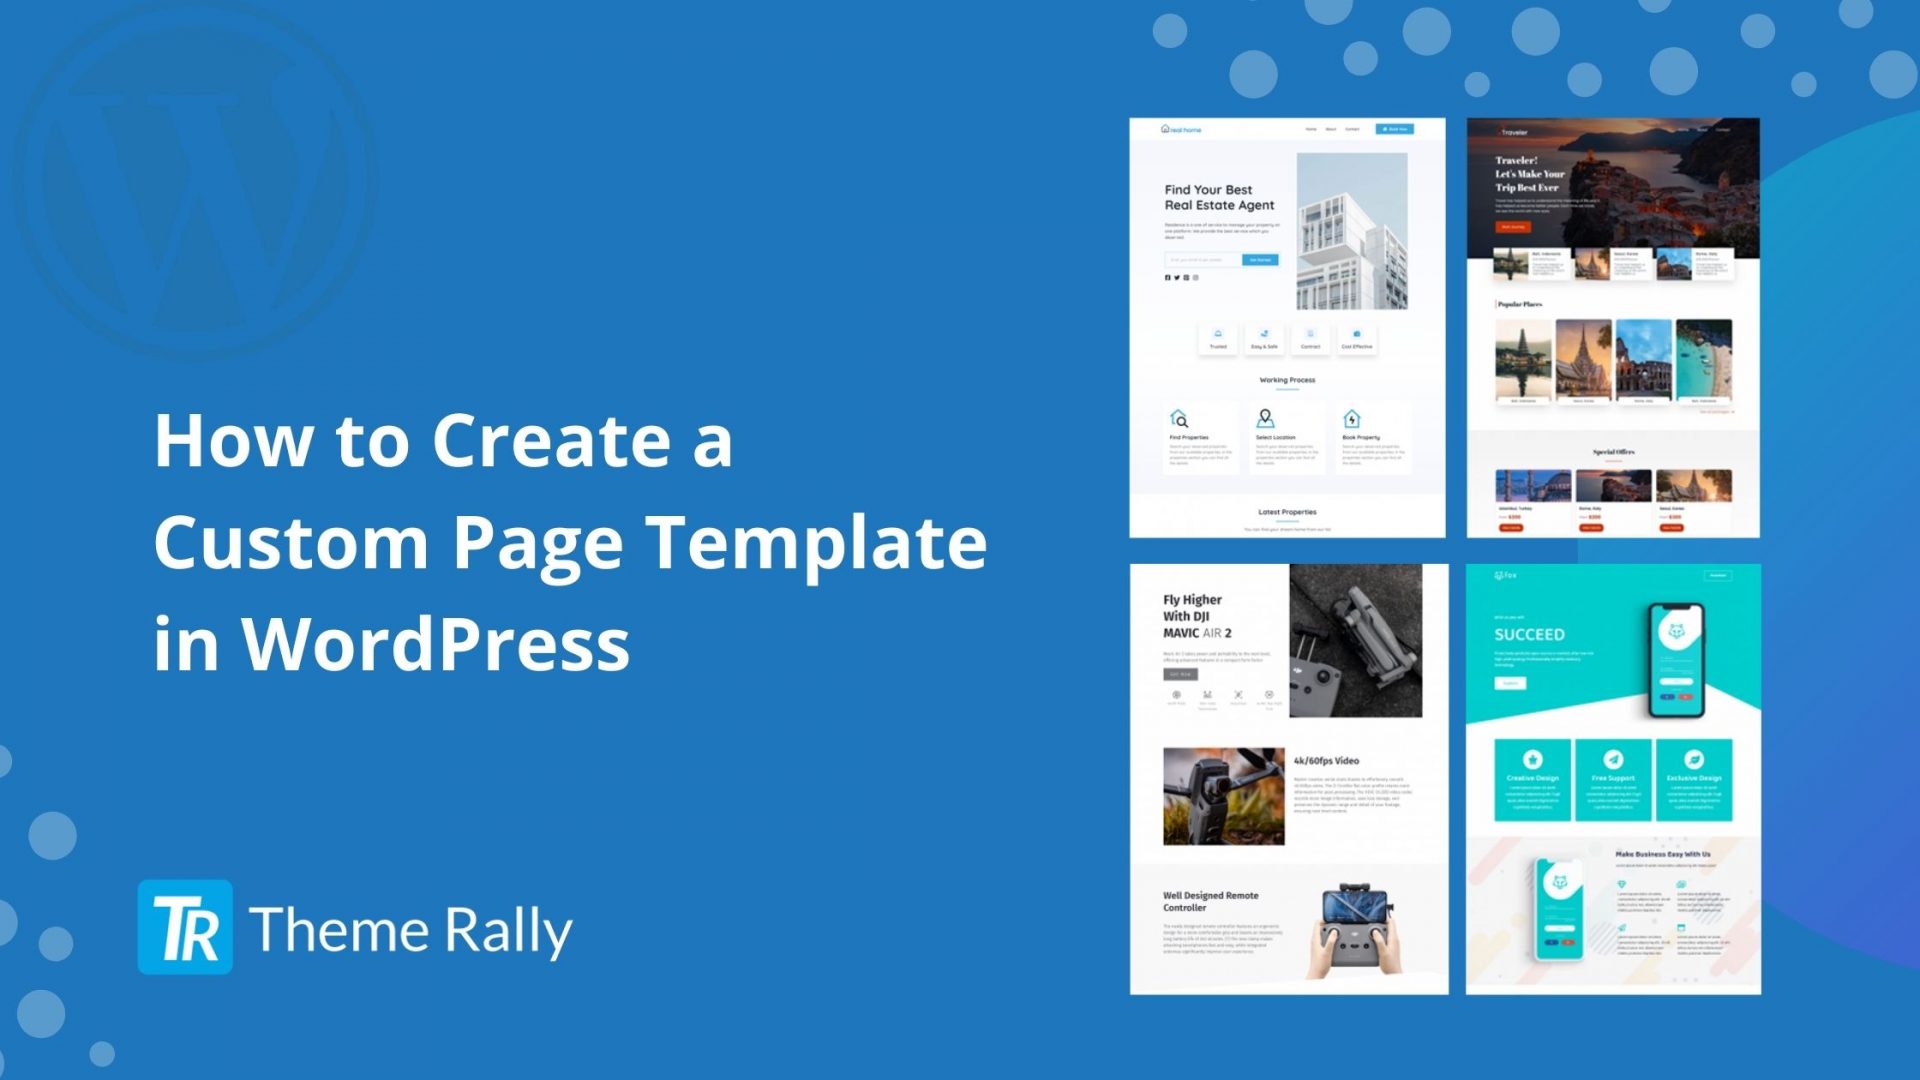 How to Create a Custom Page Template in WordPress